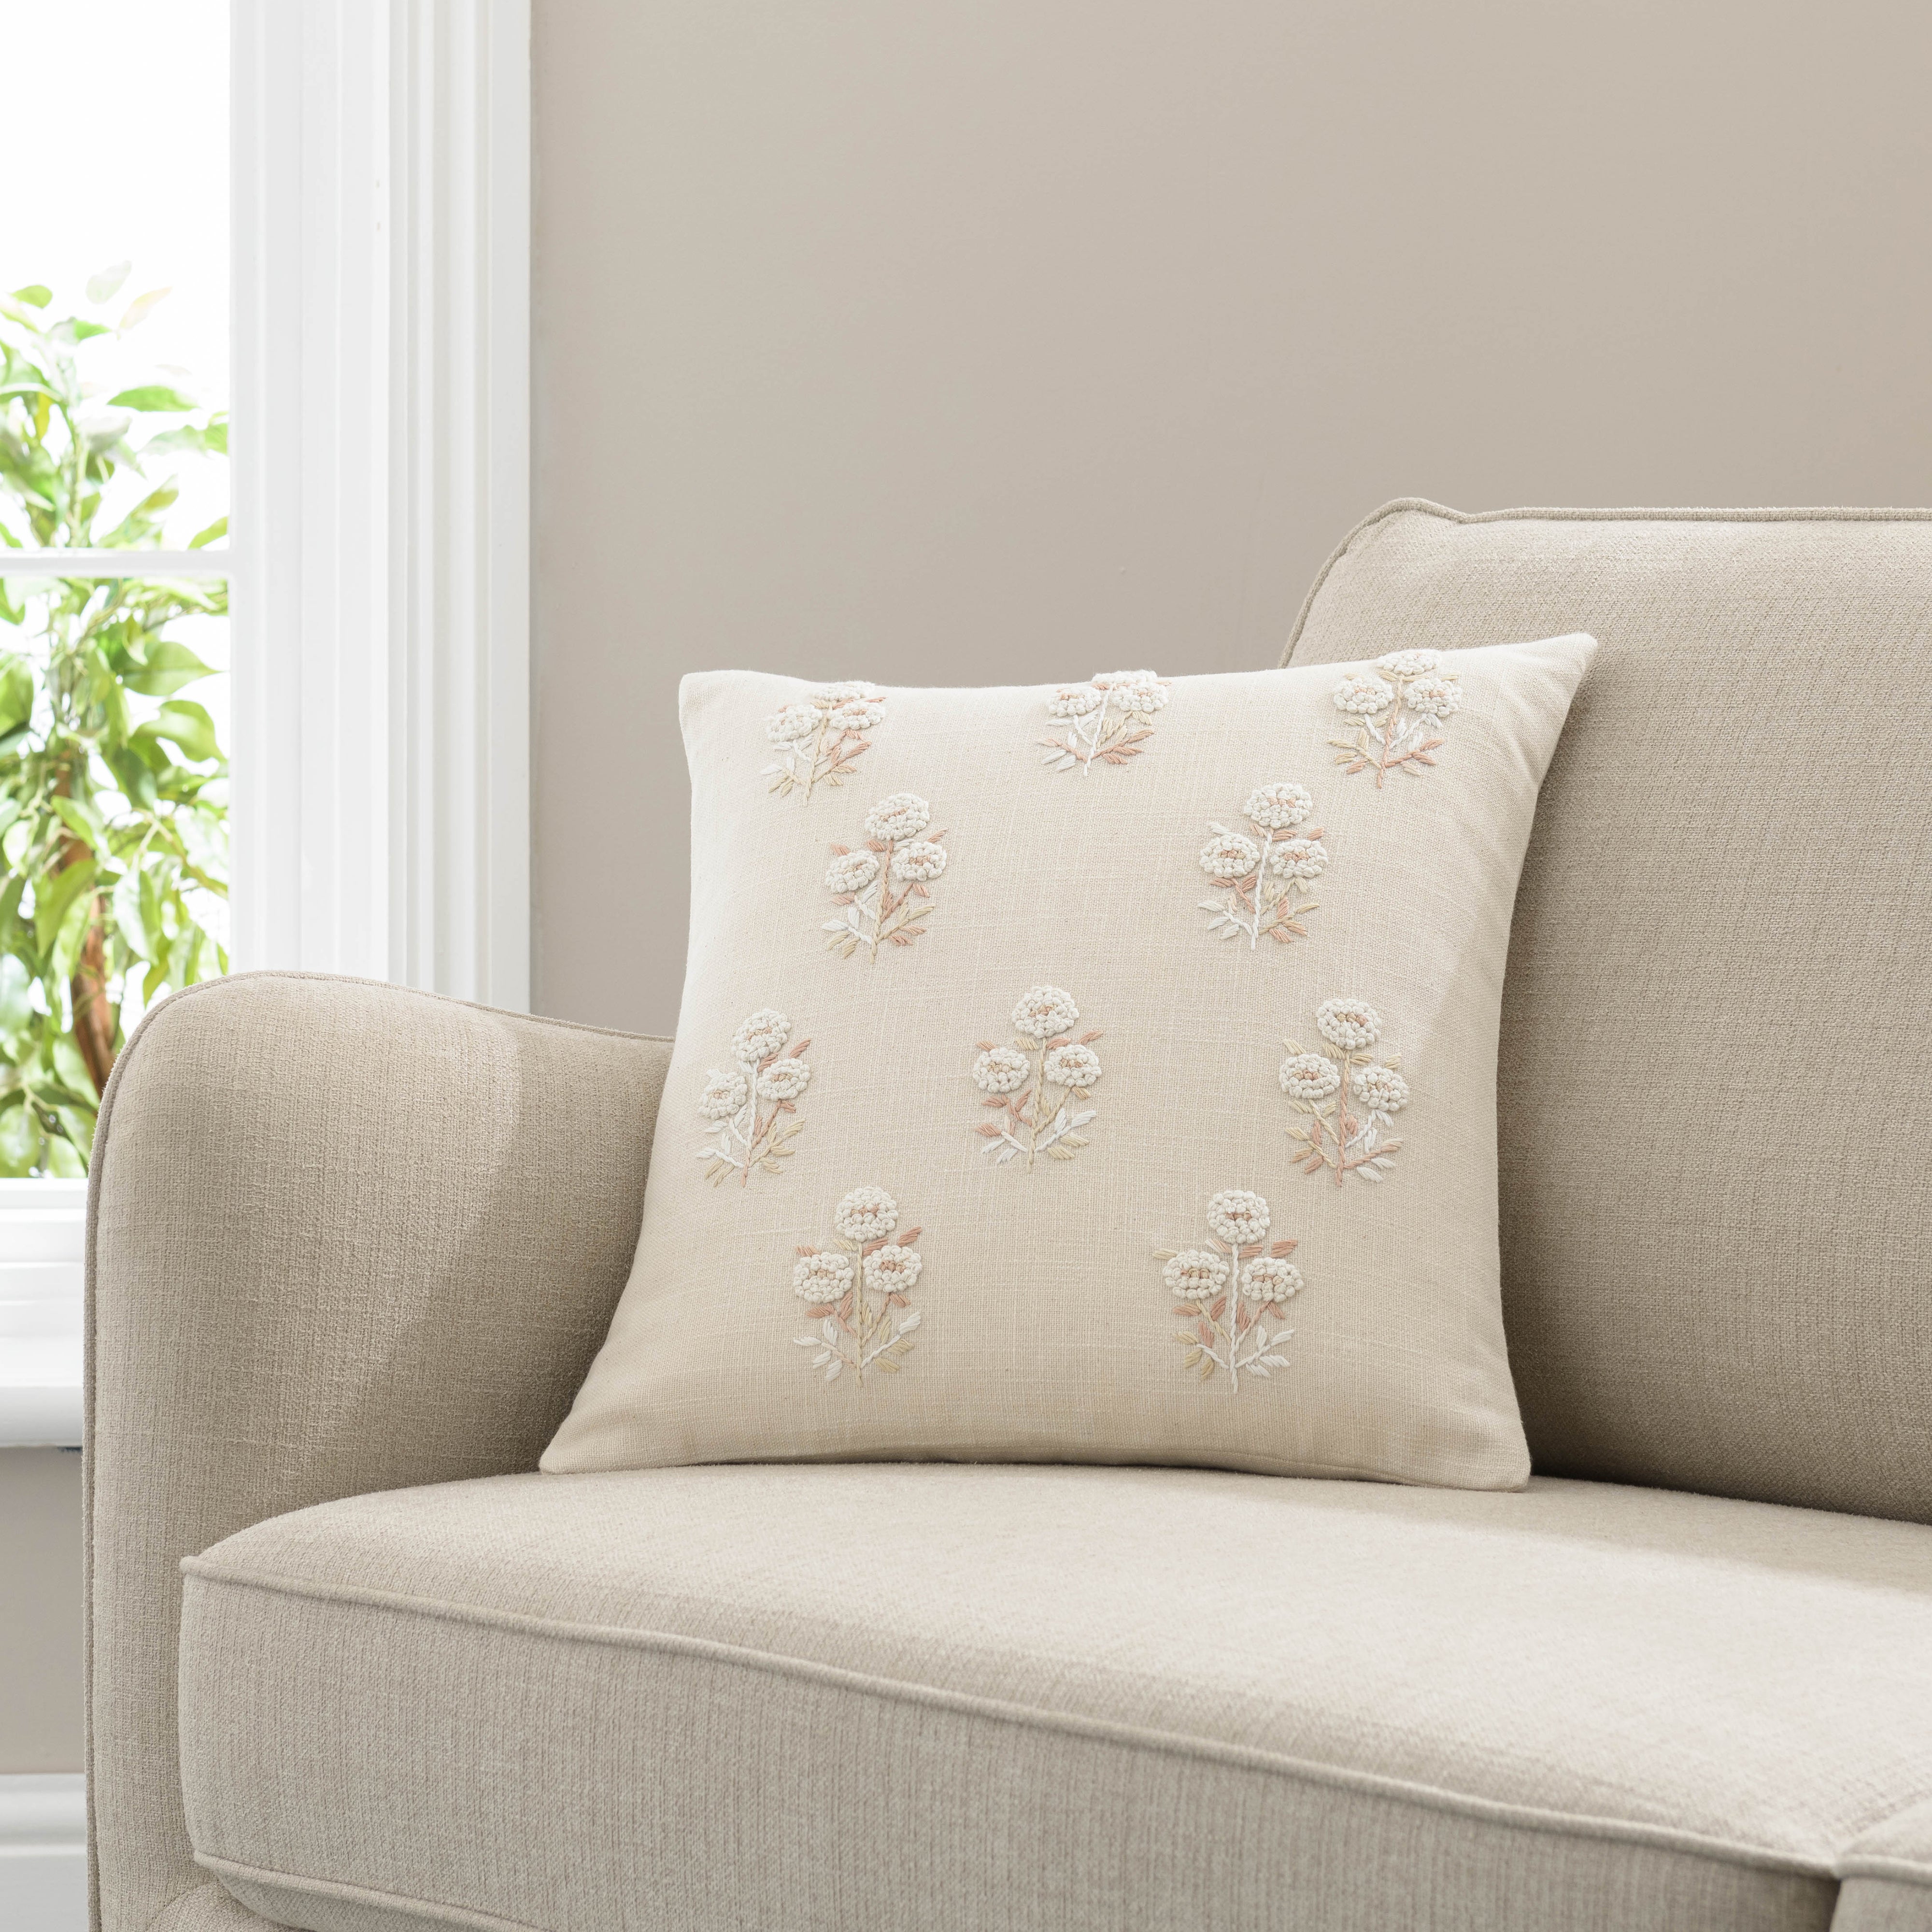 French Knot Floral Cushion Cover Natural